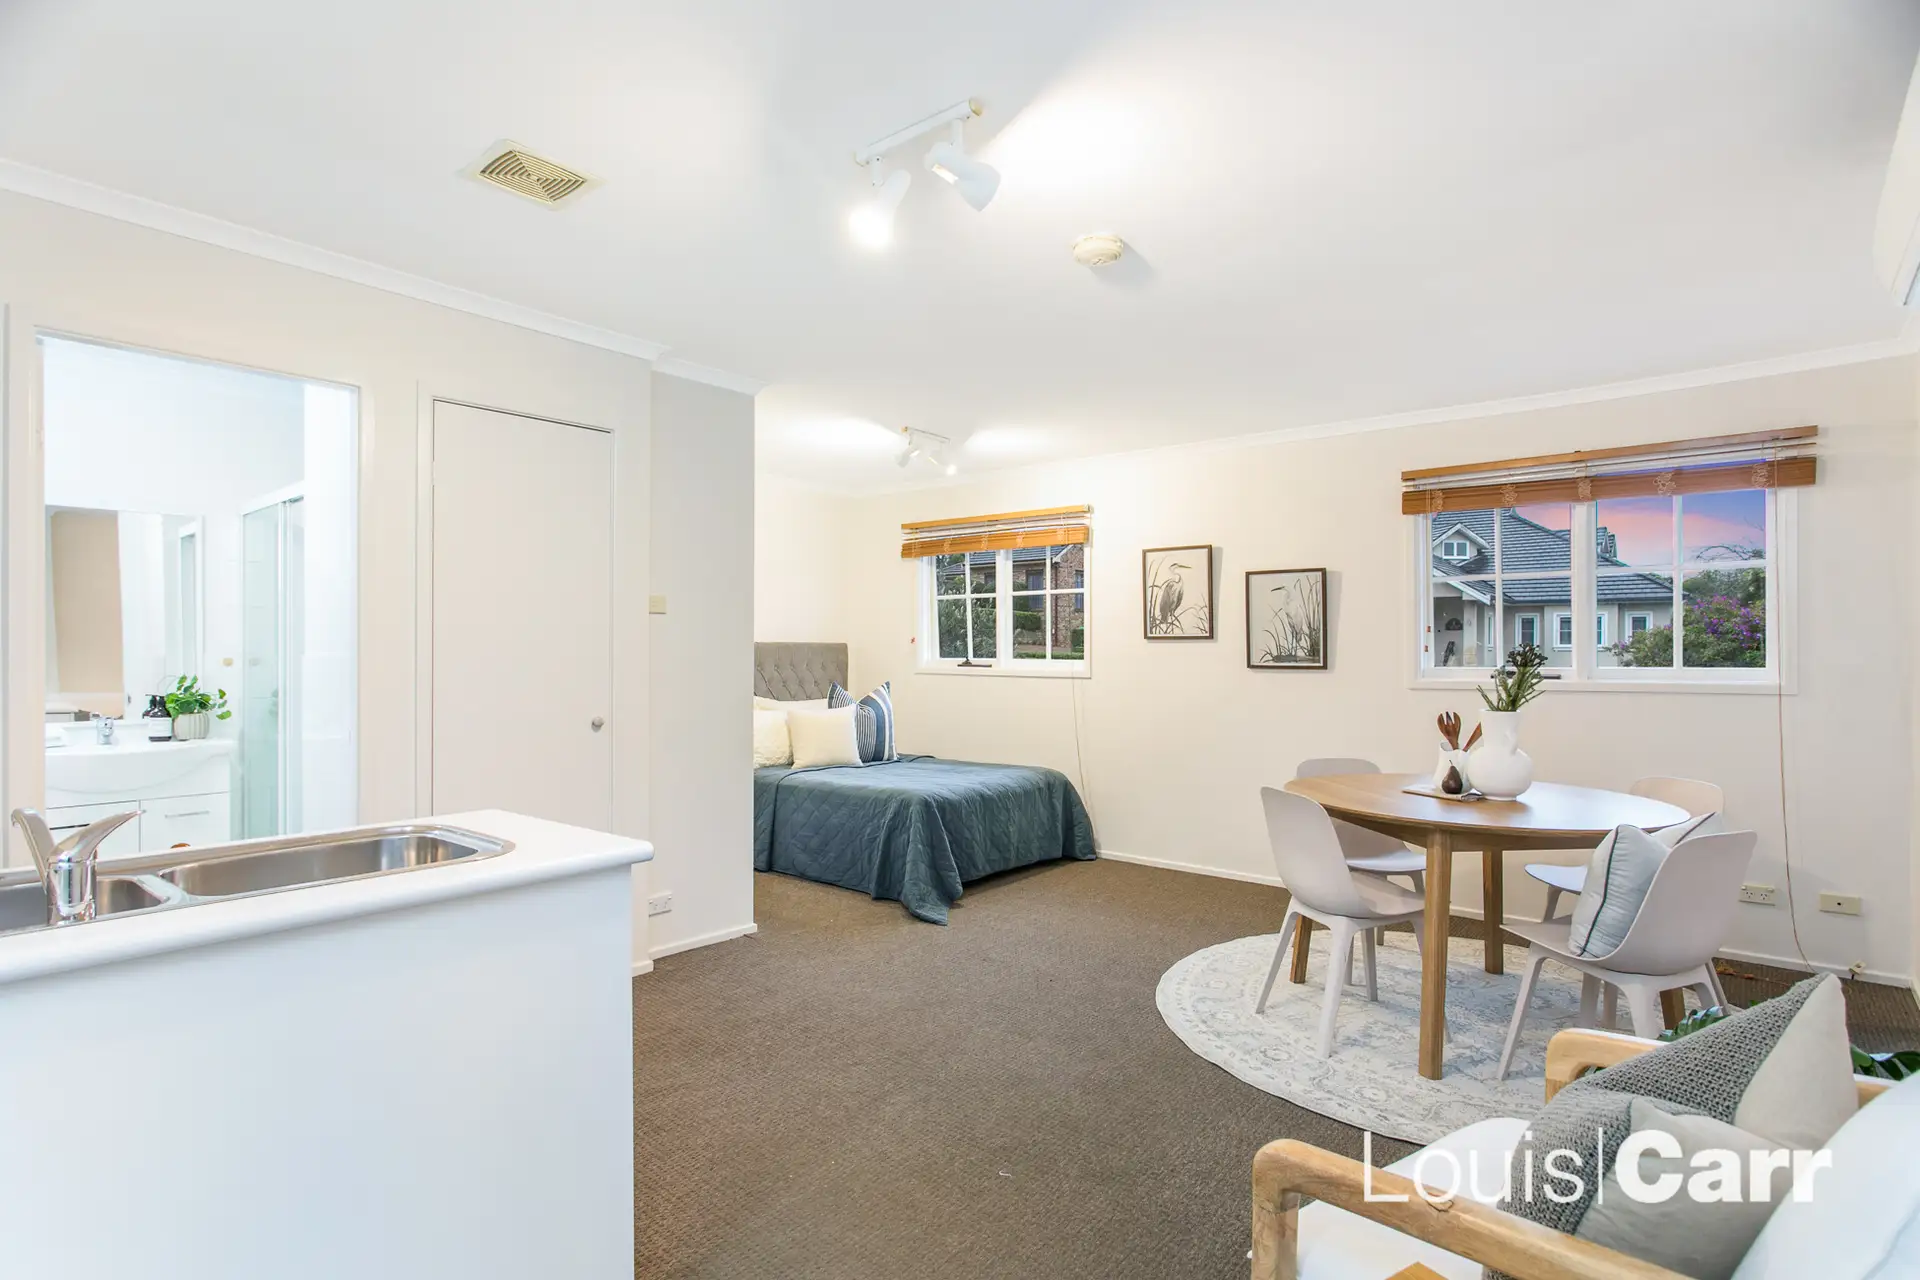 Photo #8: 7 Kambah Place, West Pennant Hills - Sold by Louis Carr Real Estate